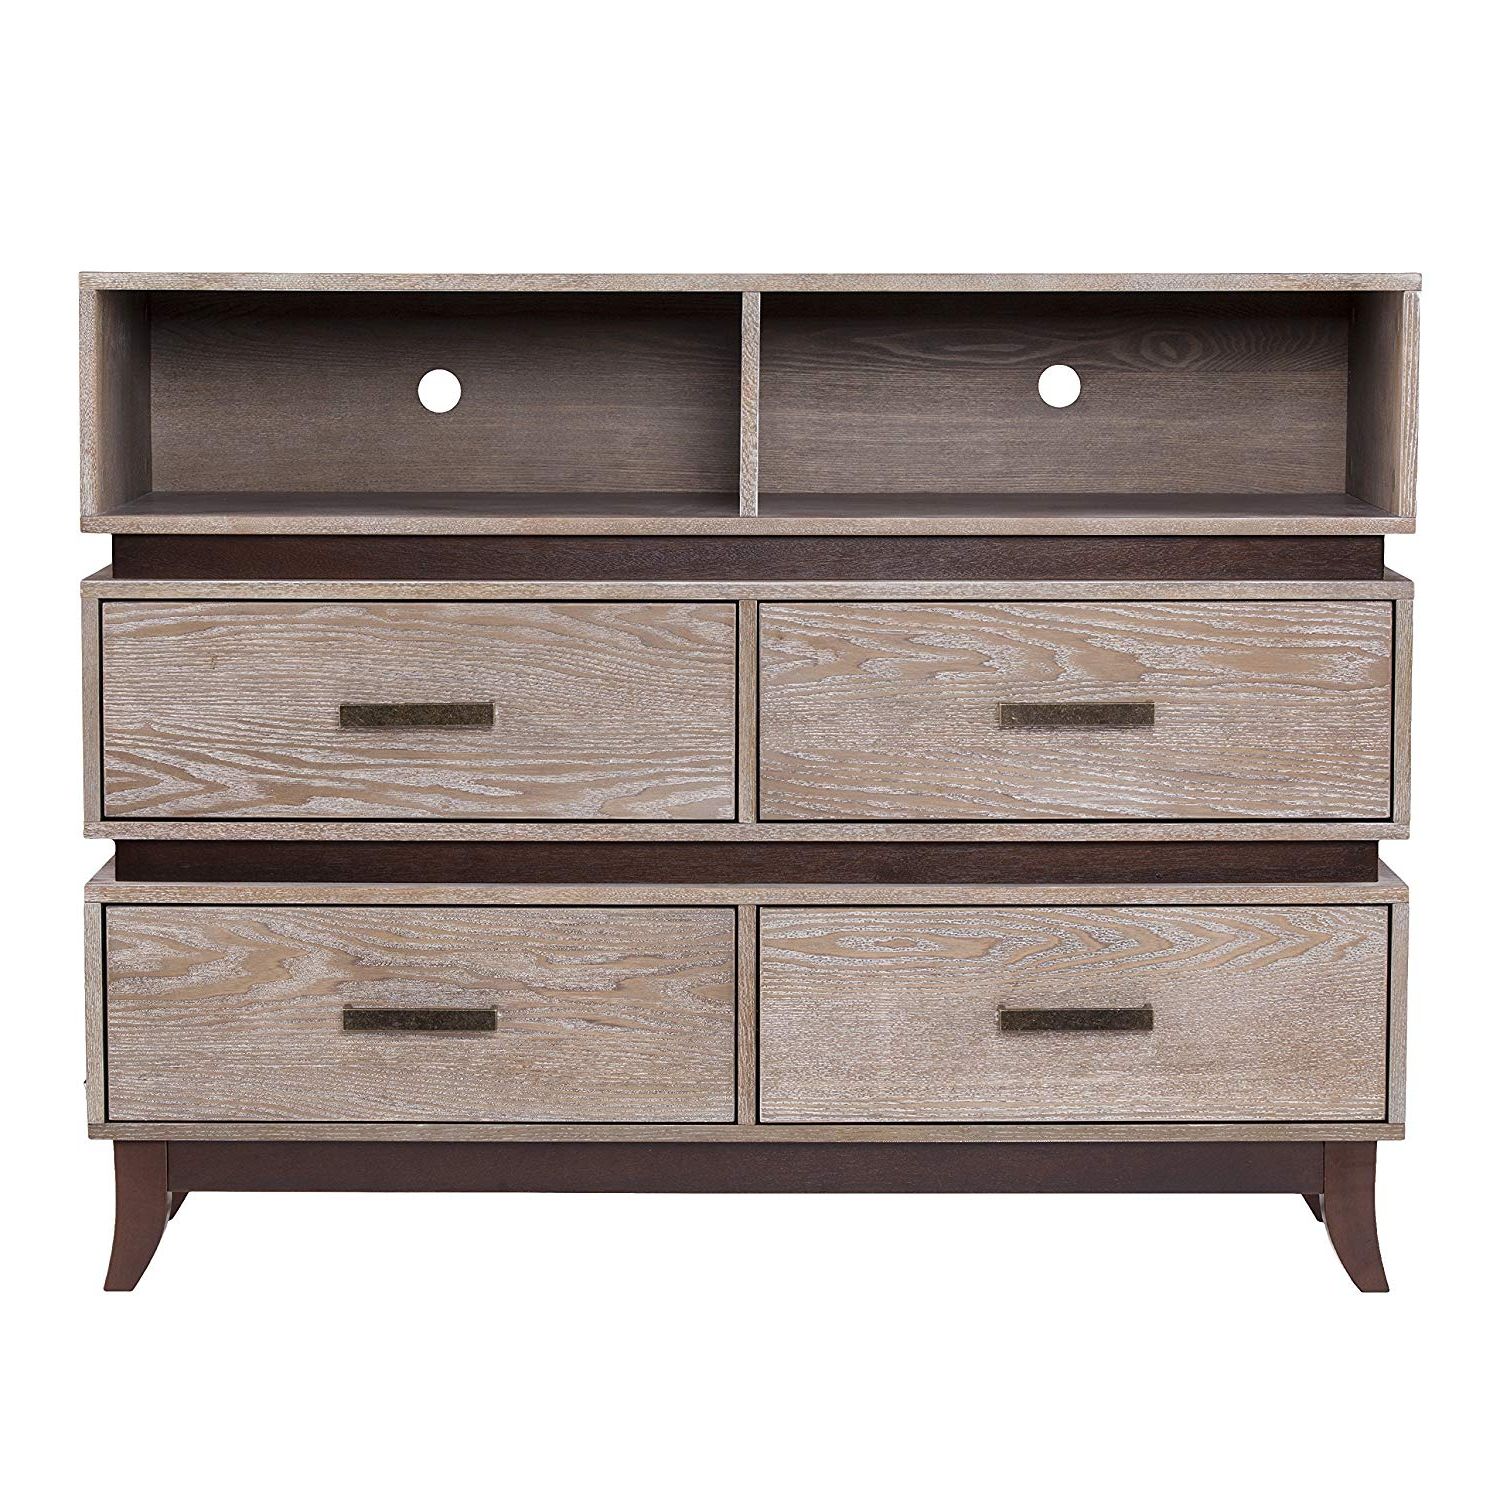 Amazon: Newbury Tall Media Console/sideboard – Burnt Oak – 46" W Intended For Well Liked Burnt Oak Metal Sideboards (View 13 of 20)